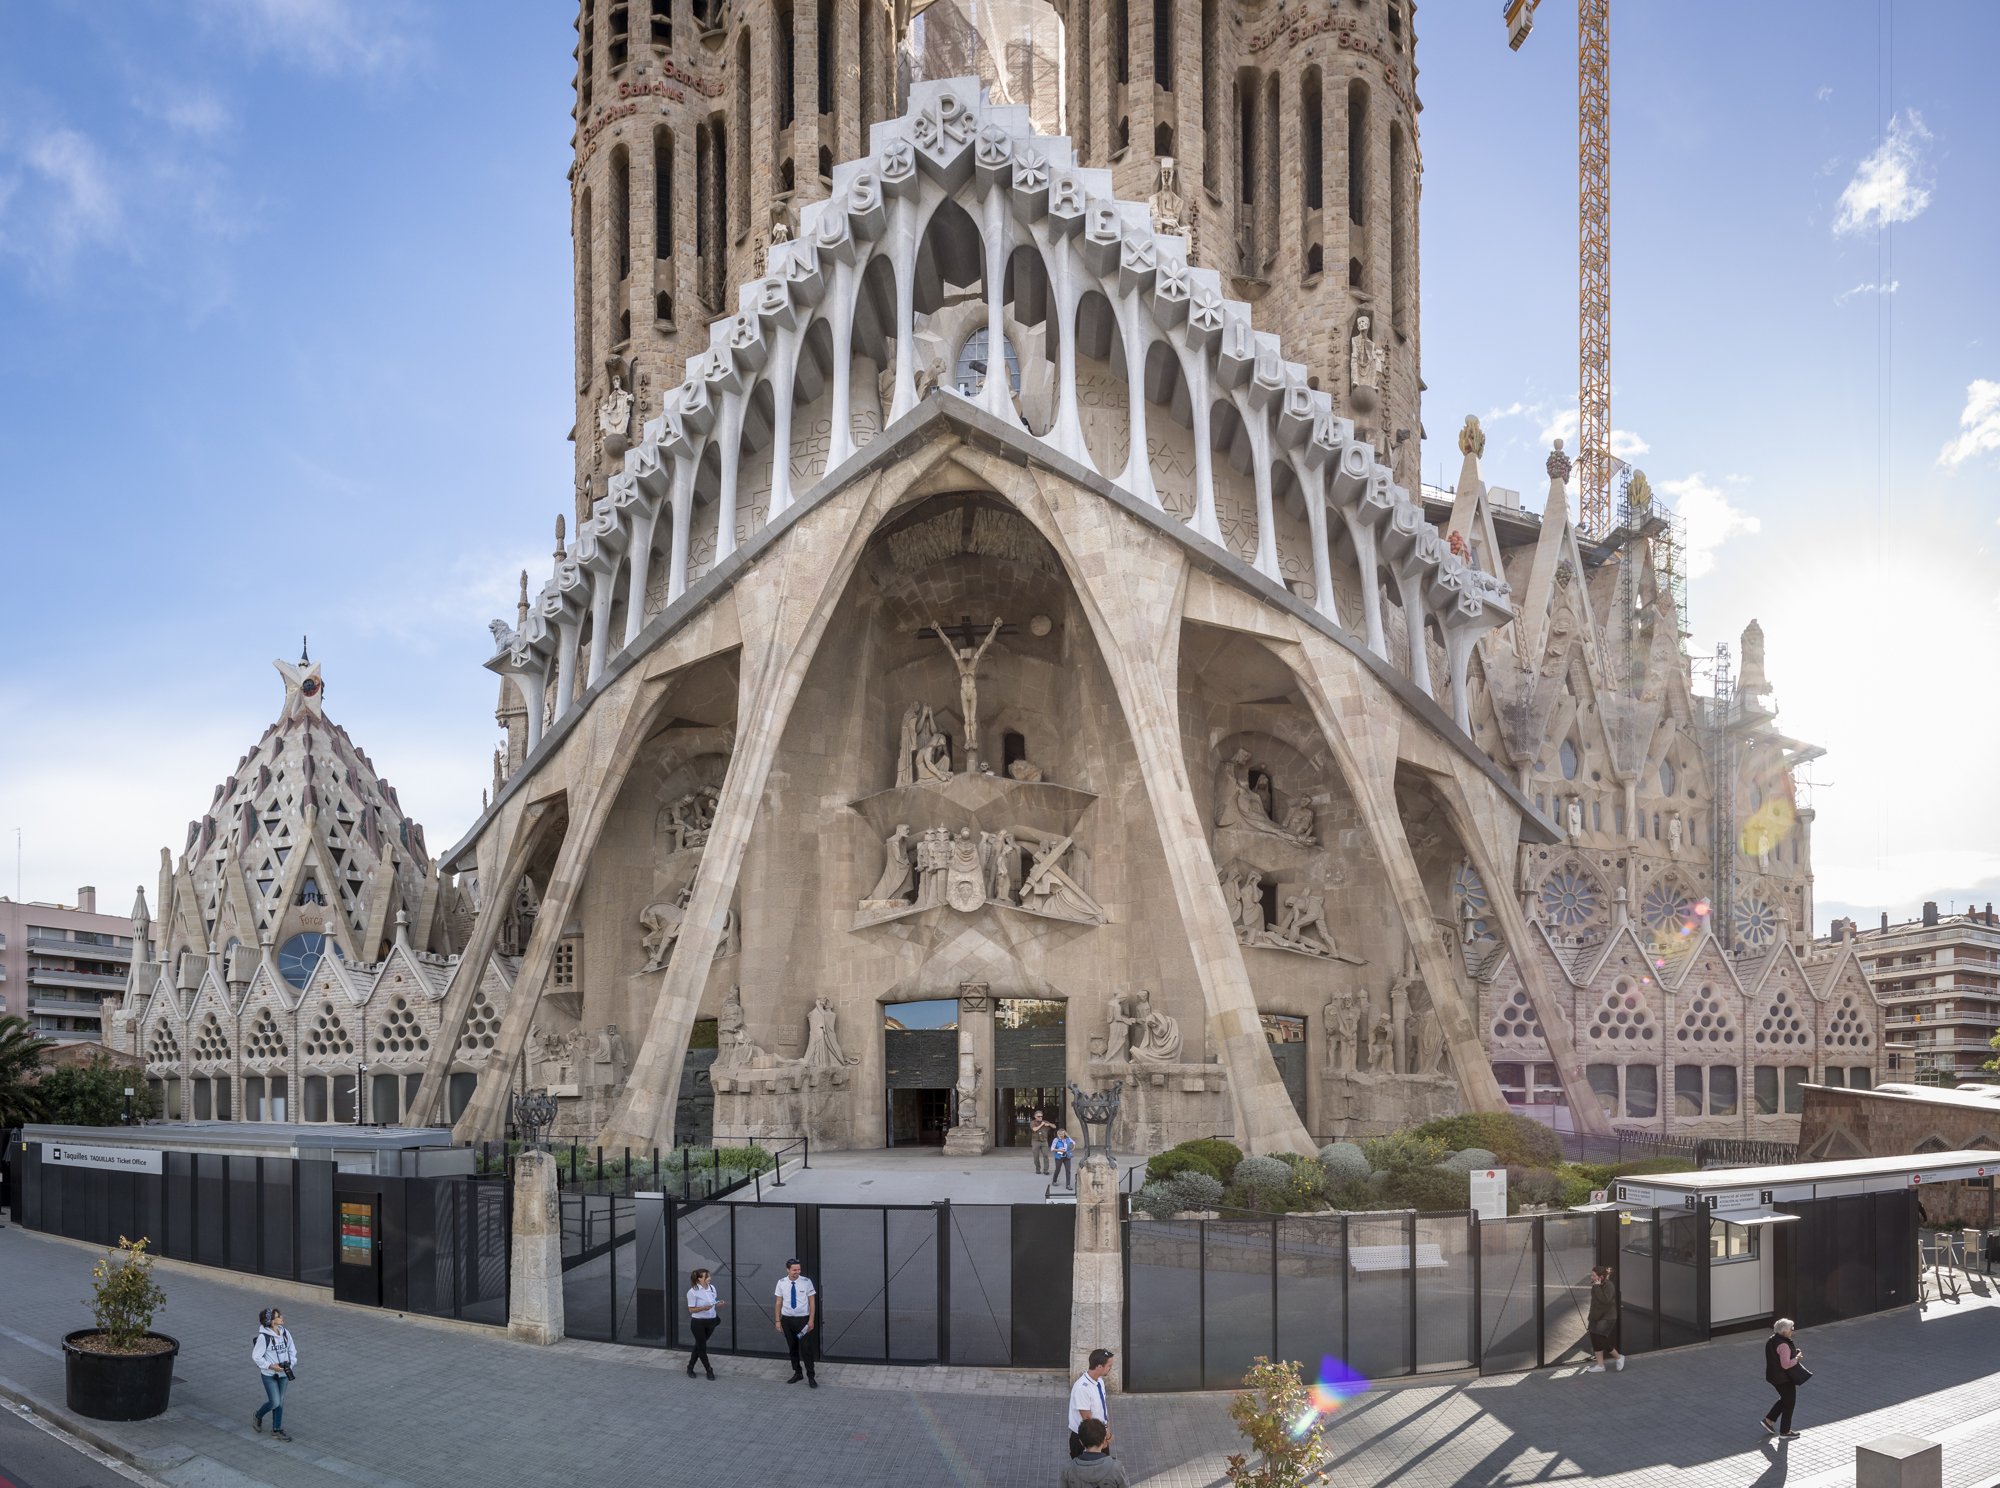 La Sagrada Família on Twitter: "Fantastic panoramic view of the Passion façade by #BarcelonaBusTurístic! With it we wish you a #HappyFriday https://t.co/Bl984w1L6W" / Twitter